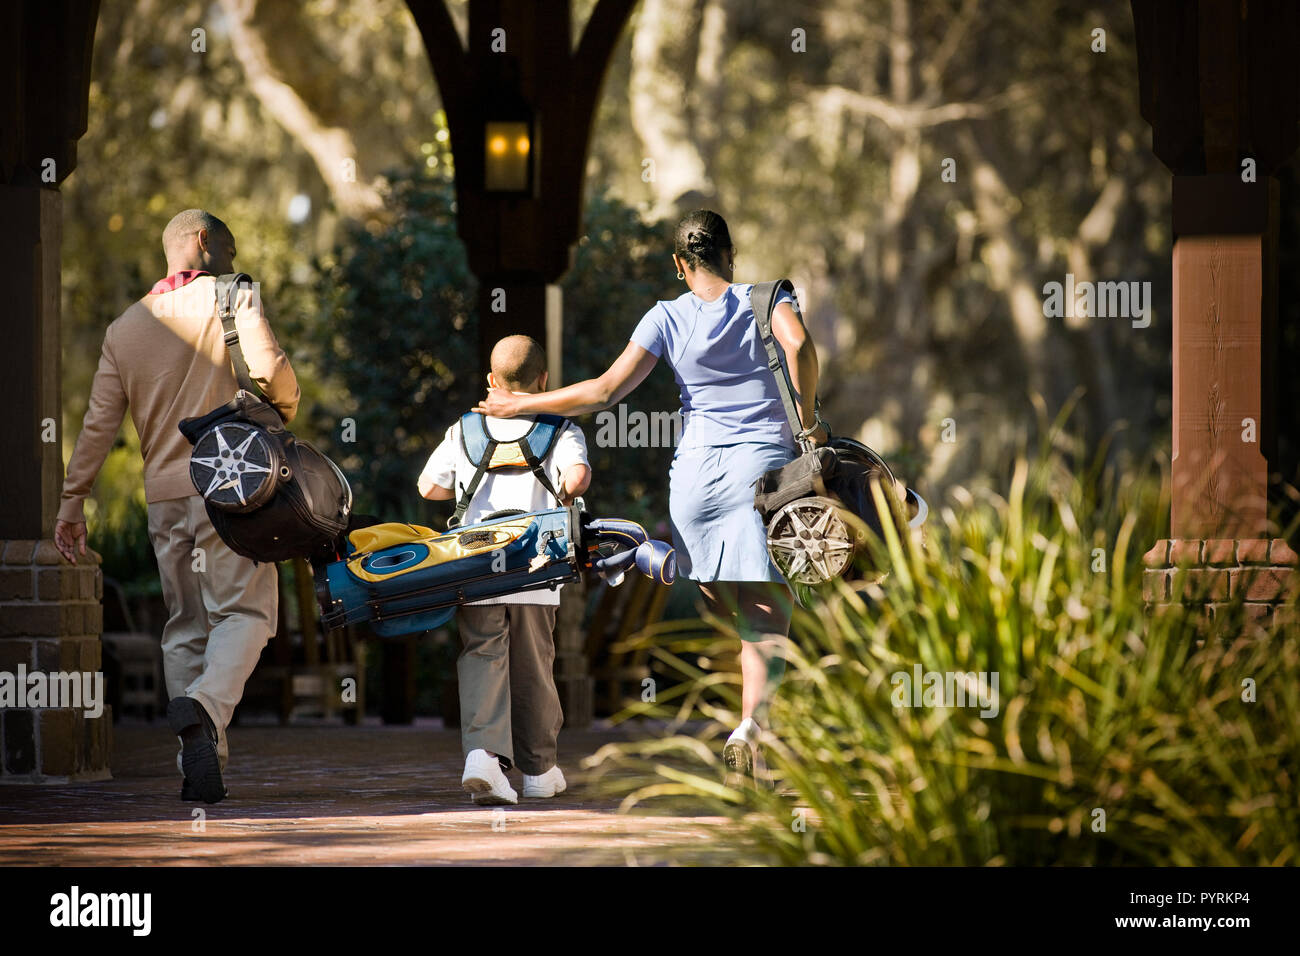 Family carrying golf bags Stock Photo